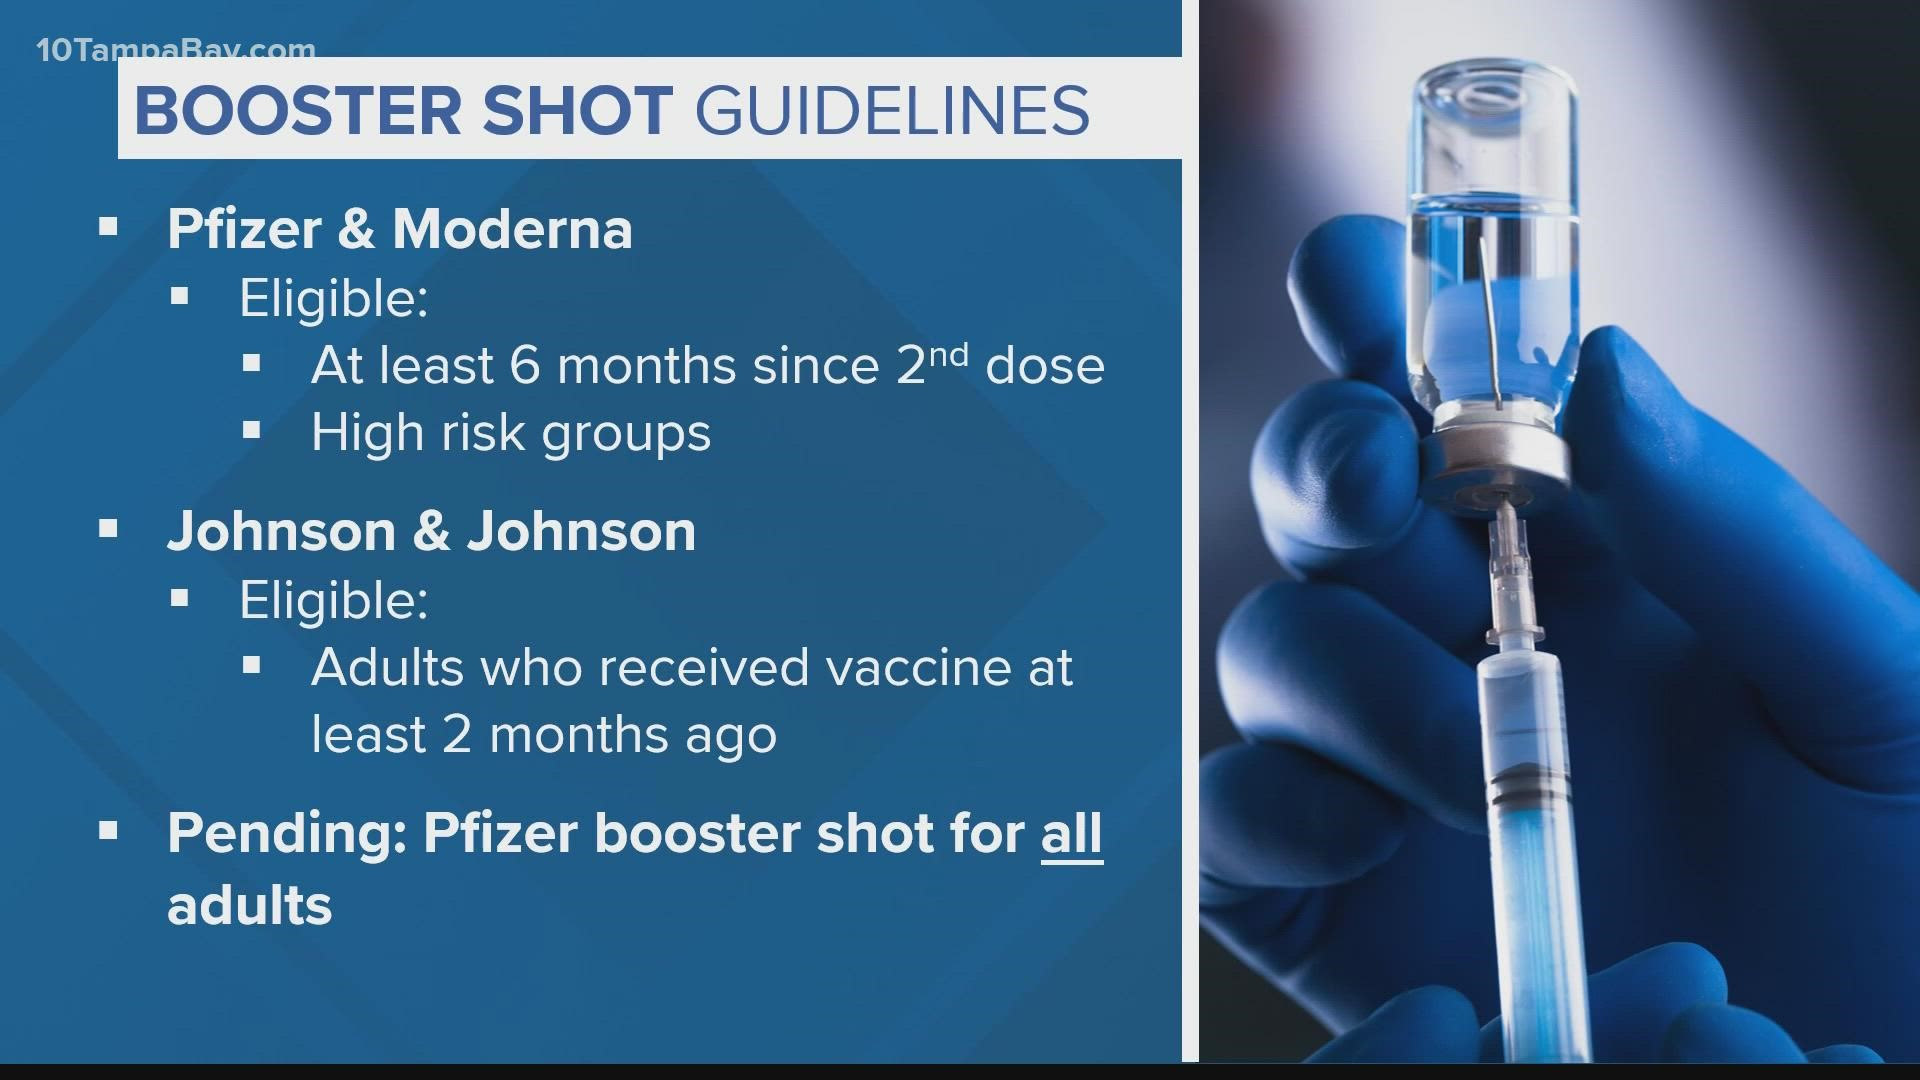 COVID-19 vaccine boosters for all adults could get the OK from the FDA and CDC as soon as Friday.